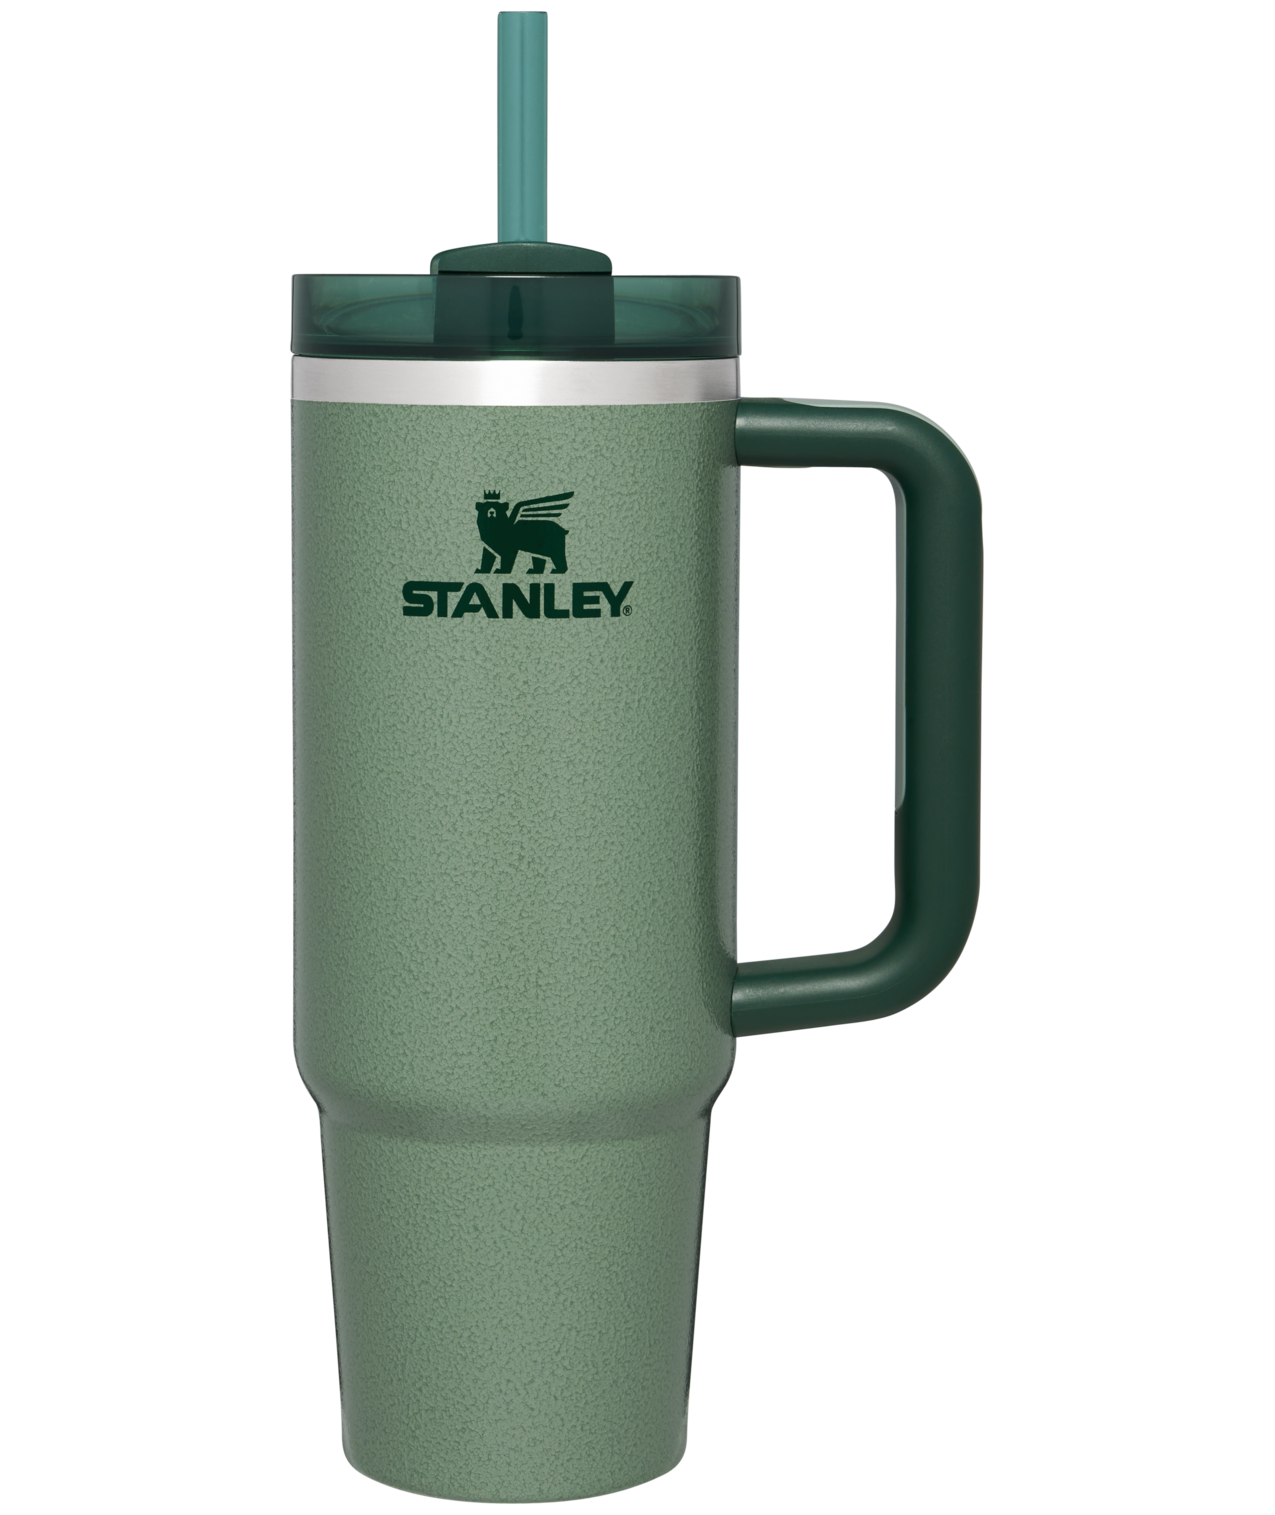 https://img-va.myshopline.com/image/store/1700619397492/B2B-Web-PNG-The-Quencher-H2-O-FlowState-Tumbler-30OZ-Hammertone-Green-Front.png?w=1275&h=1515